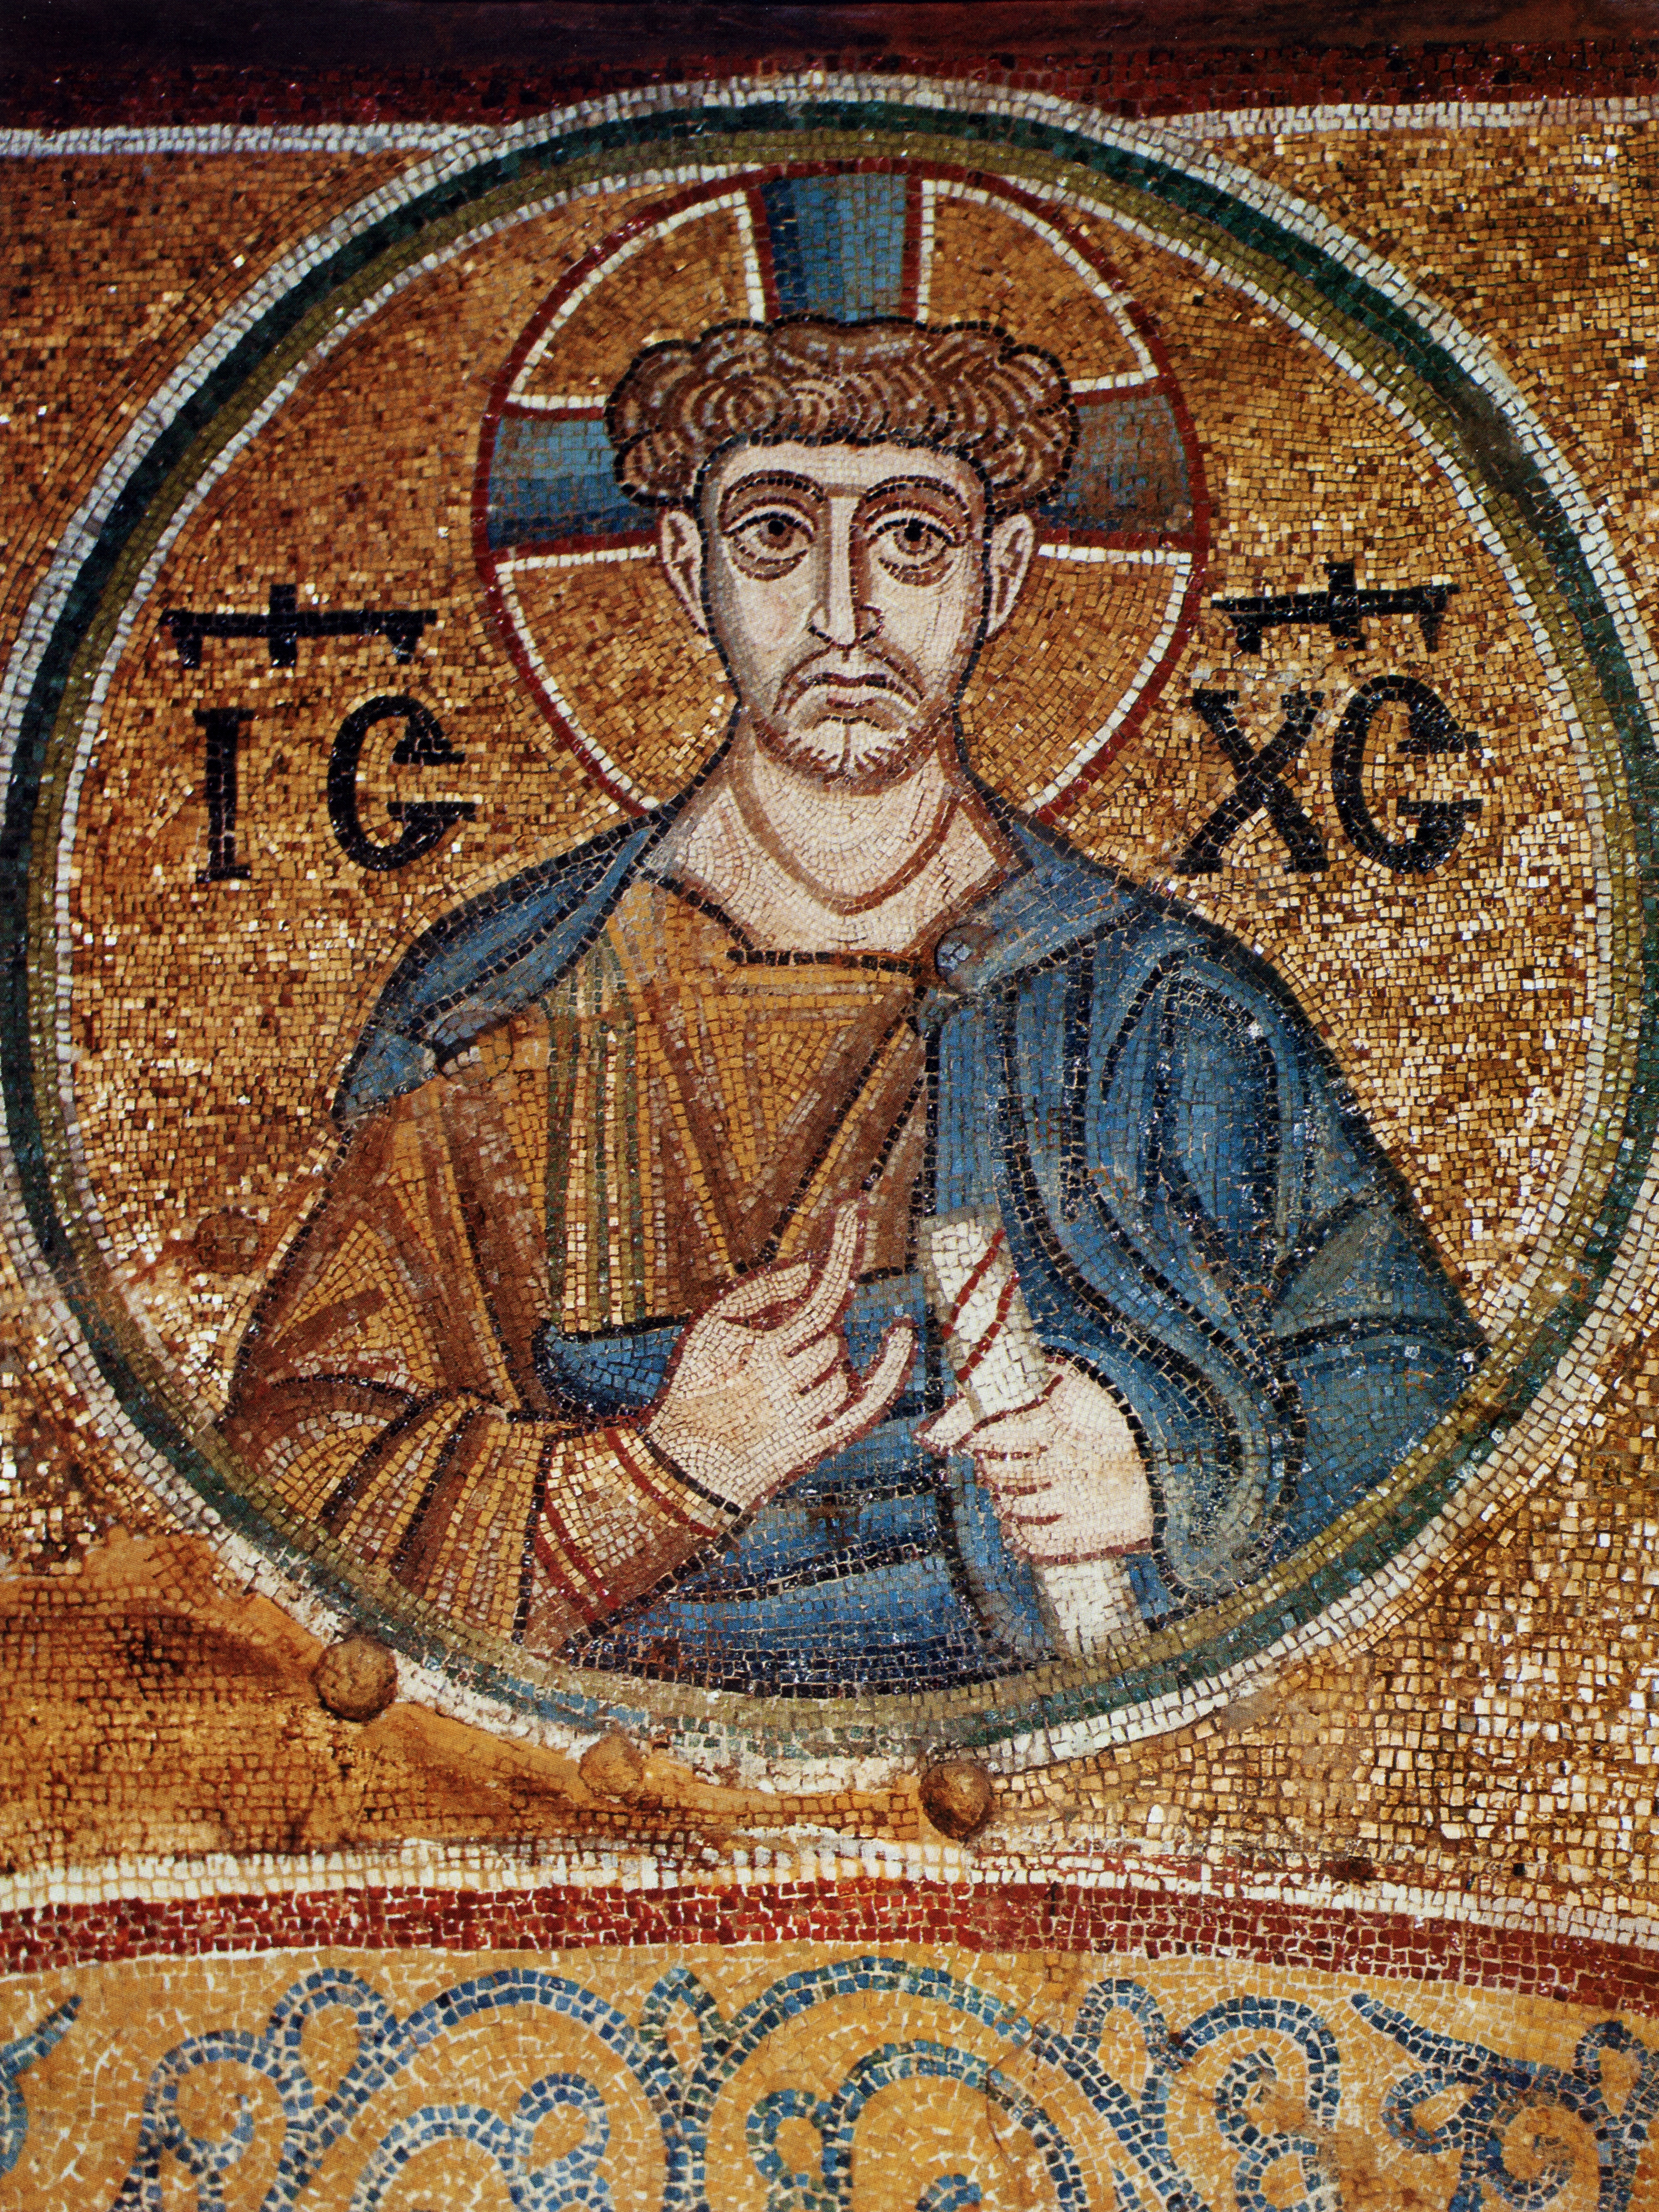 Mosaic of male figure holding scroll in medallion